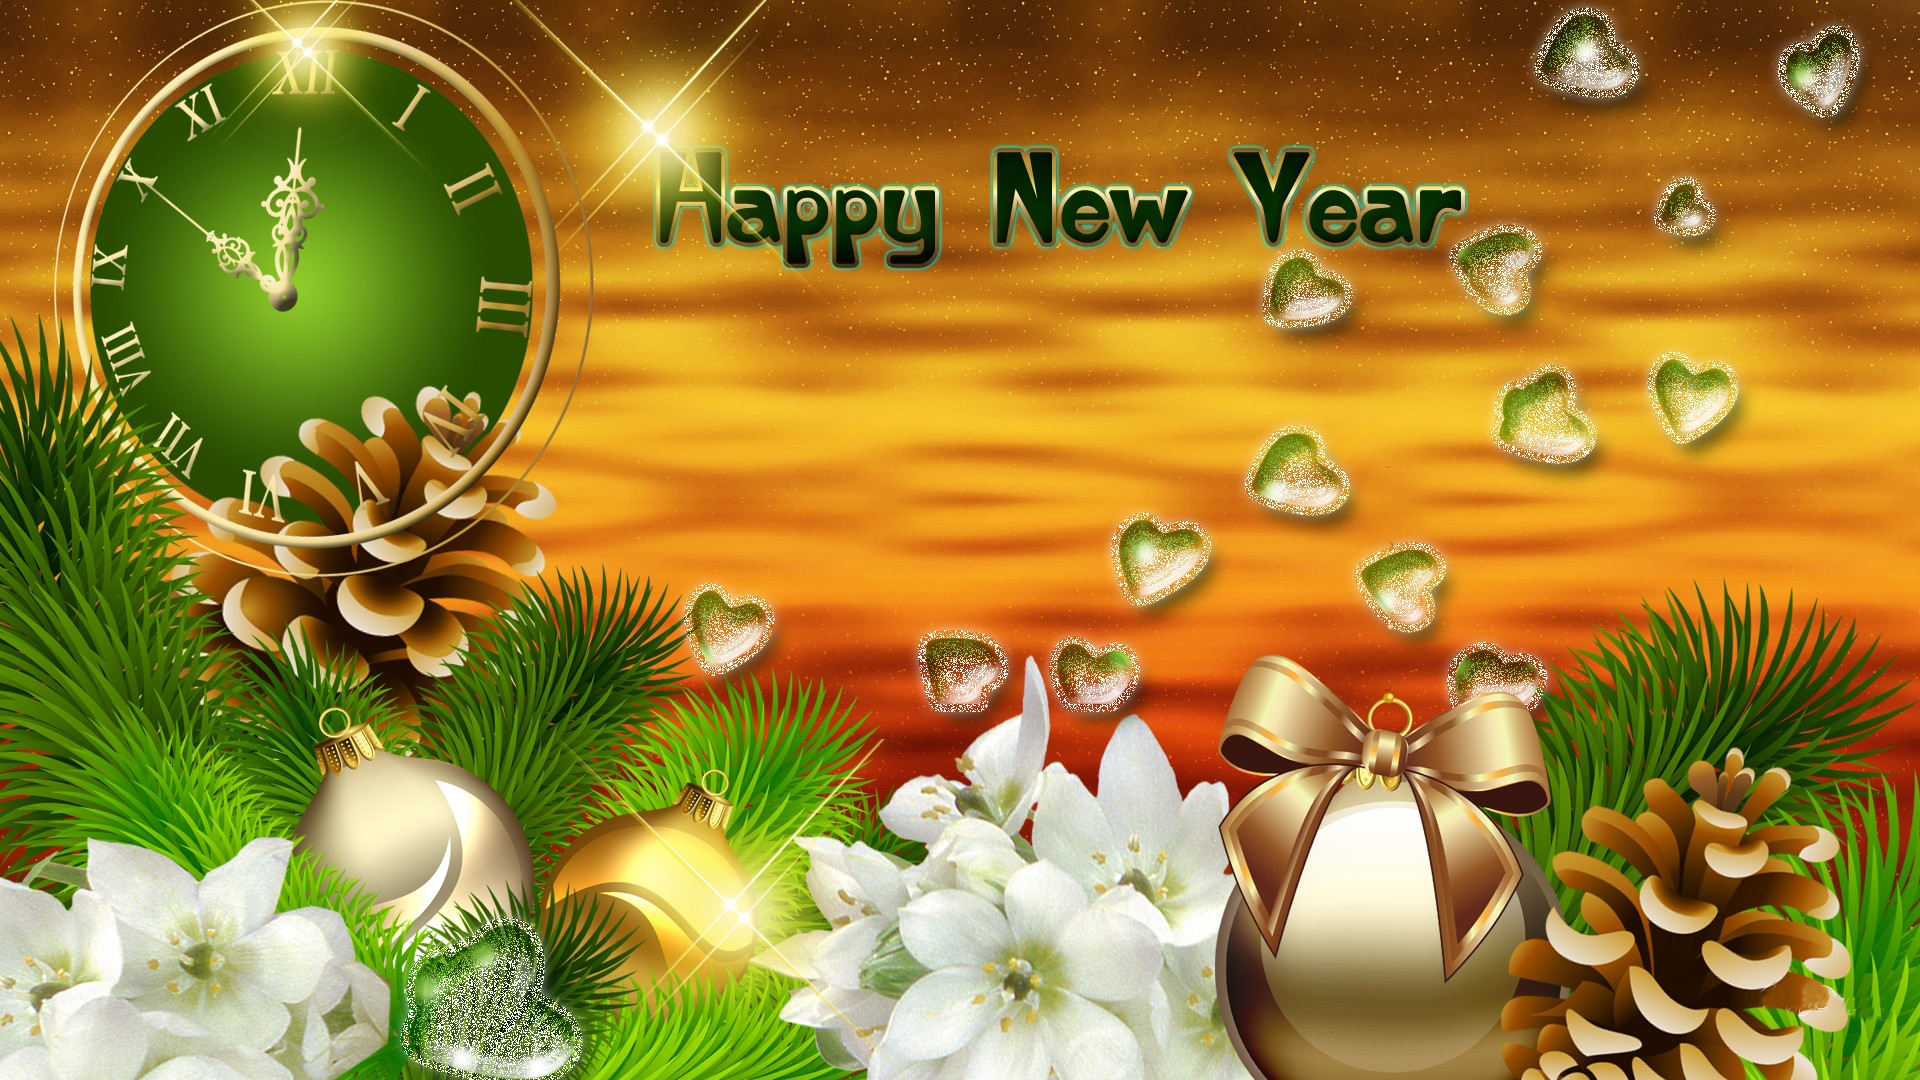 Happy New Year Desktop Hd Wallpapers For Laptop Pc Mobile 1920x1080